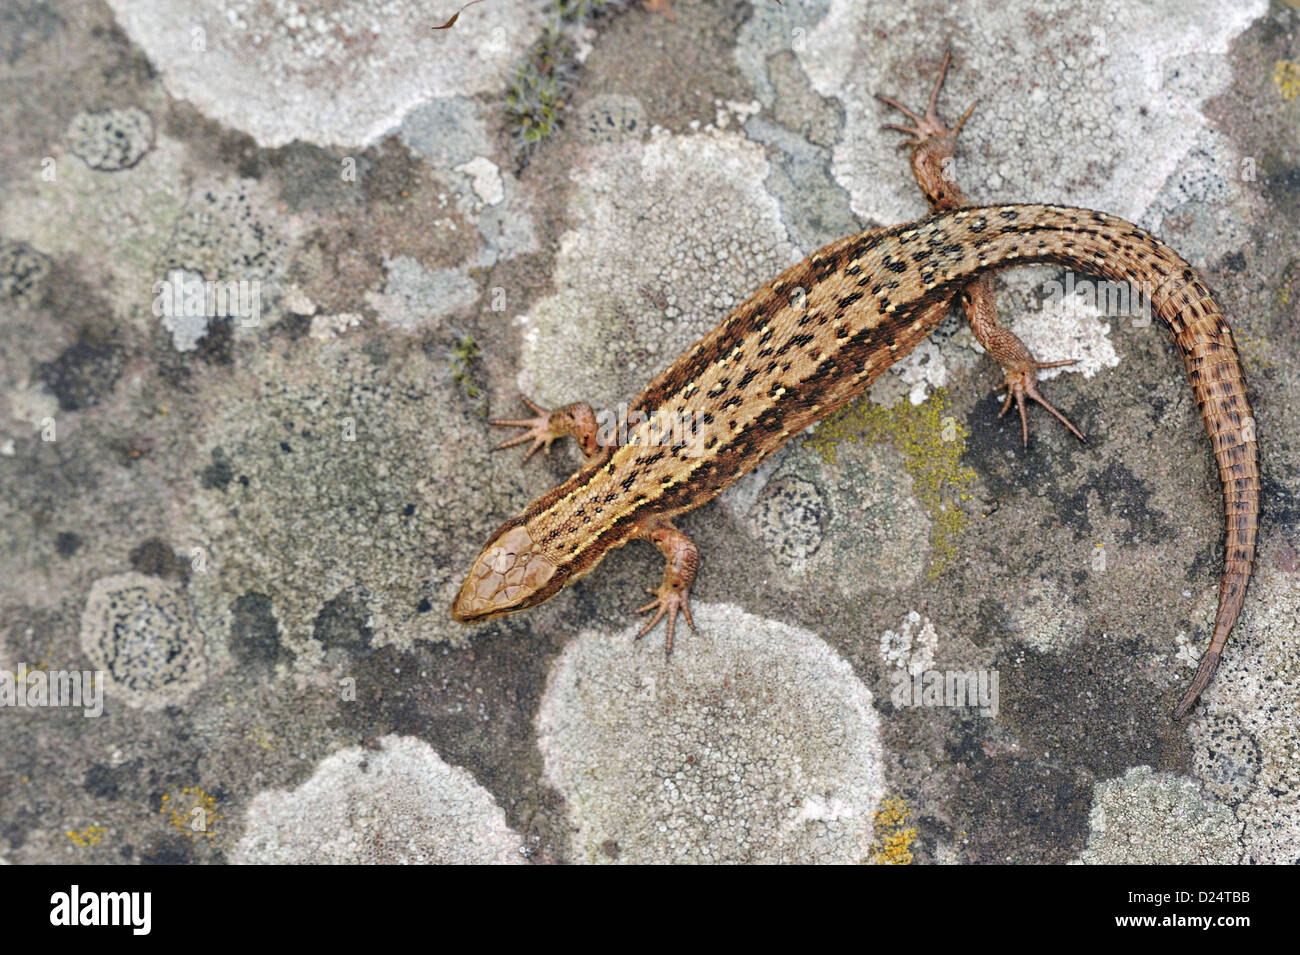 Common Lizard (Zootoca vivipara) adult female, resting on lichen covered rock, Abergavenny, Monmouthshire, Wales, March Stock Photo